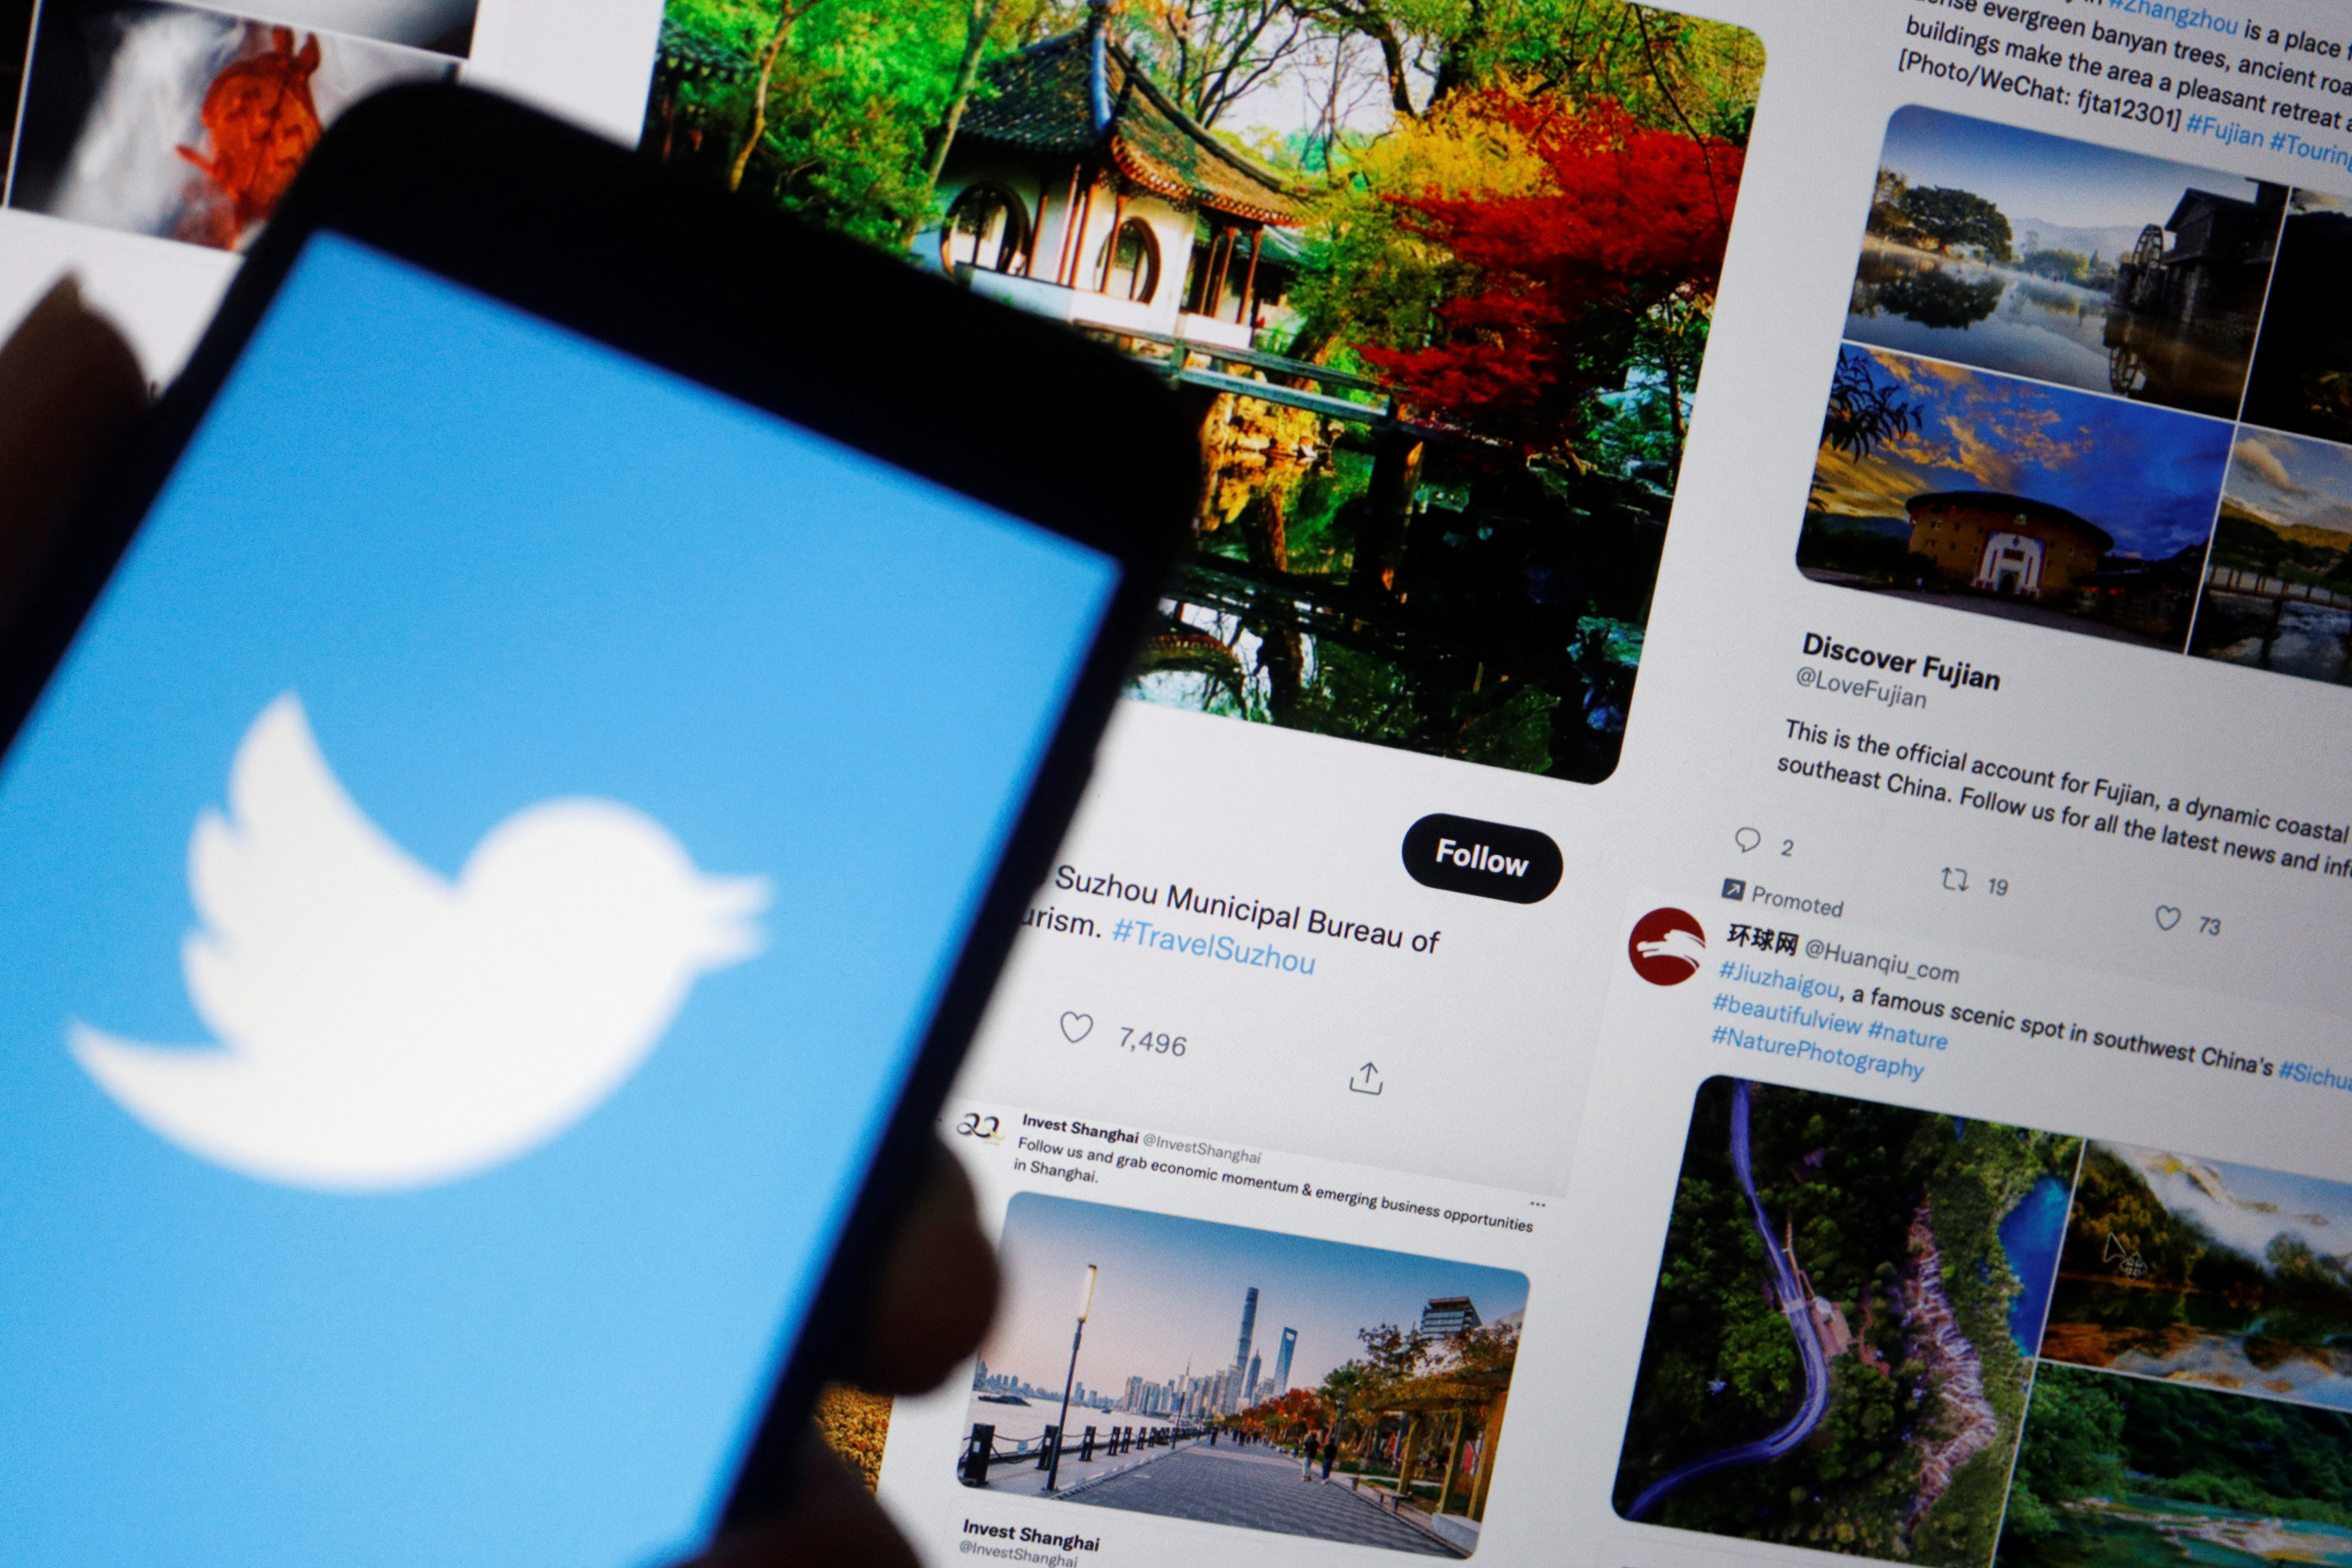 Twitter and ads on China accounts